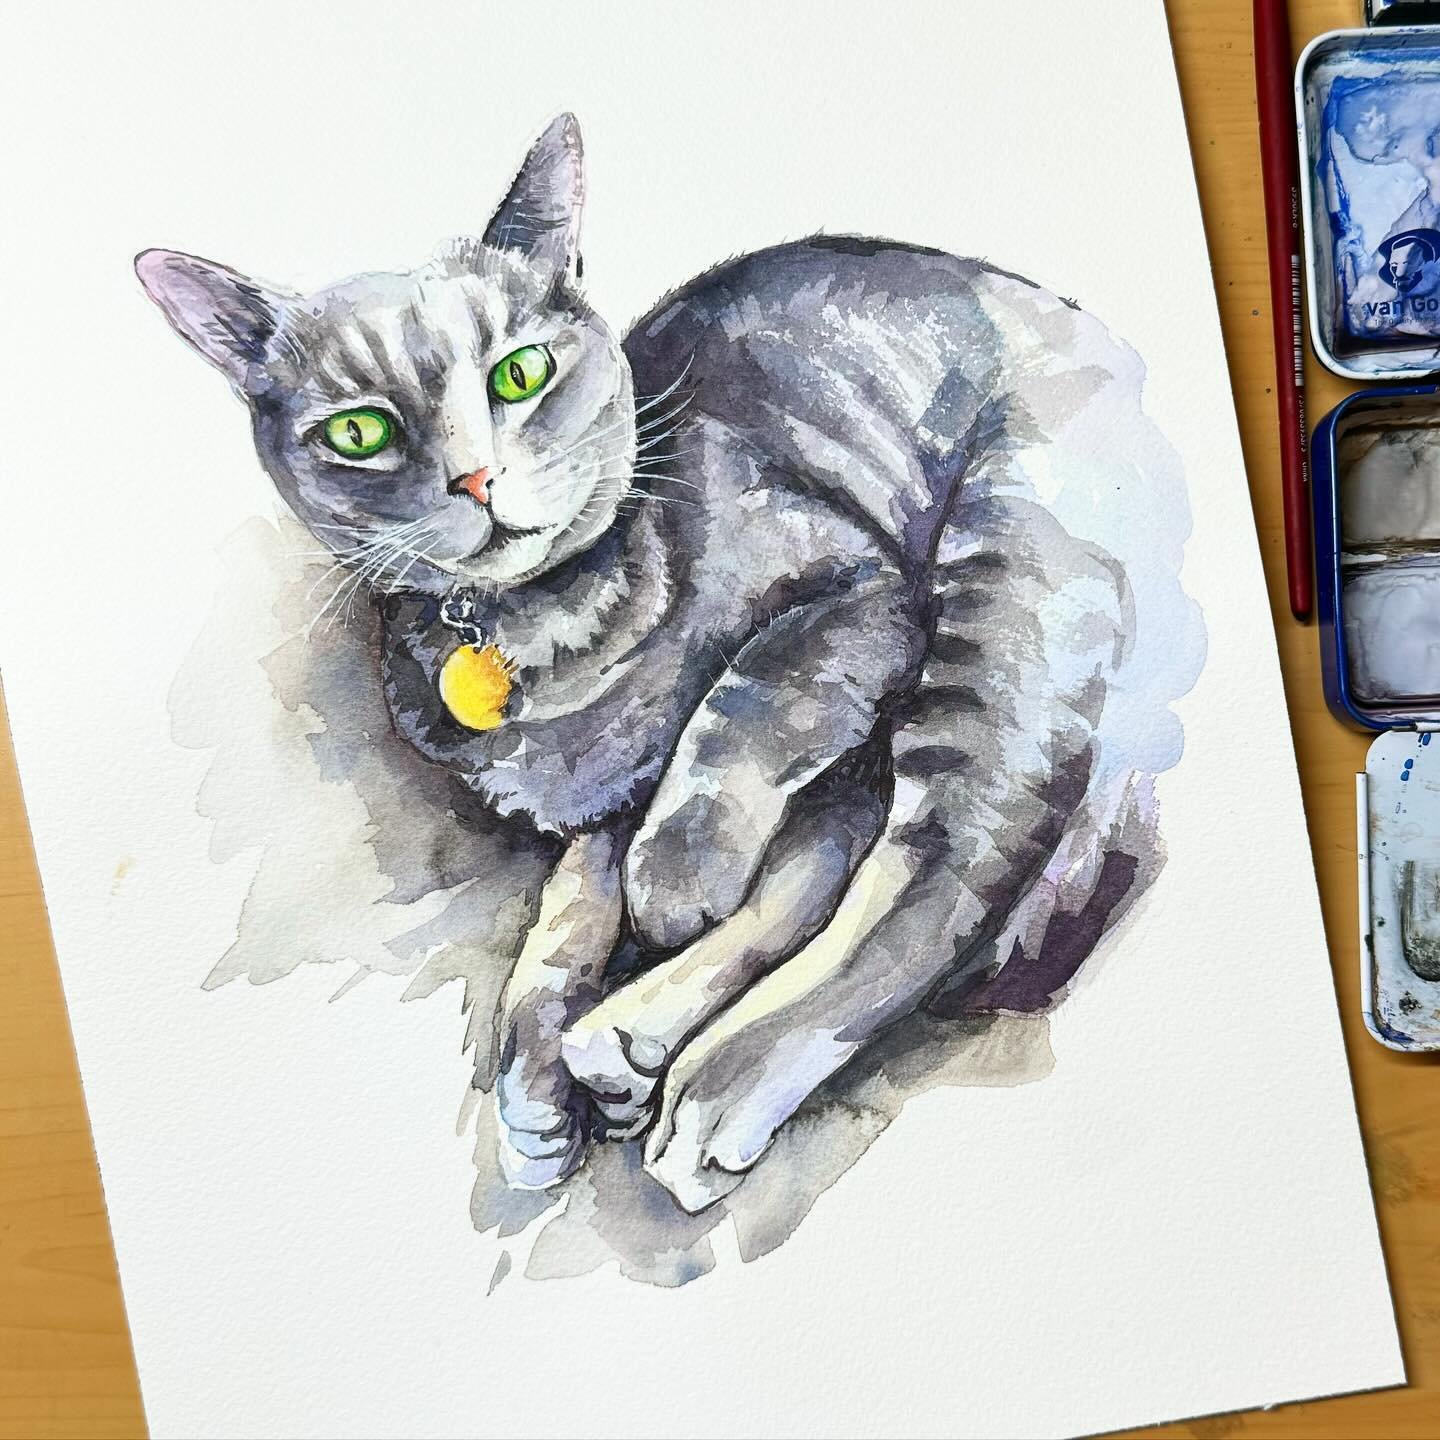 Pet portraits are back! @anna_moxnes commissioned this from me. 😸😻🥰

The portraits never really left&hellip;it&rsquo;s just been a while since I&rsquo;ve posted one.

Anna is a skydiving friend of @melaniecurtis11. When they&rsquo;re not falling o